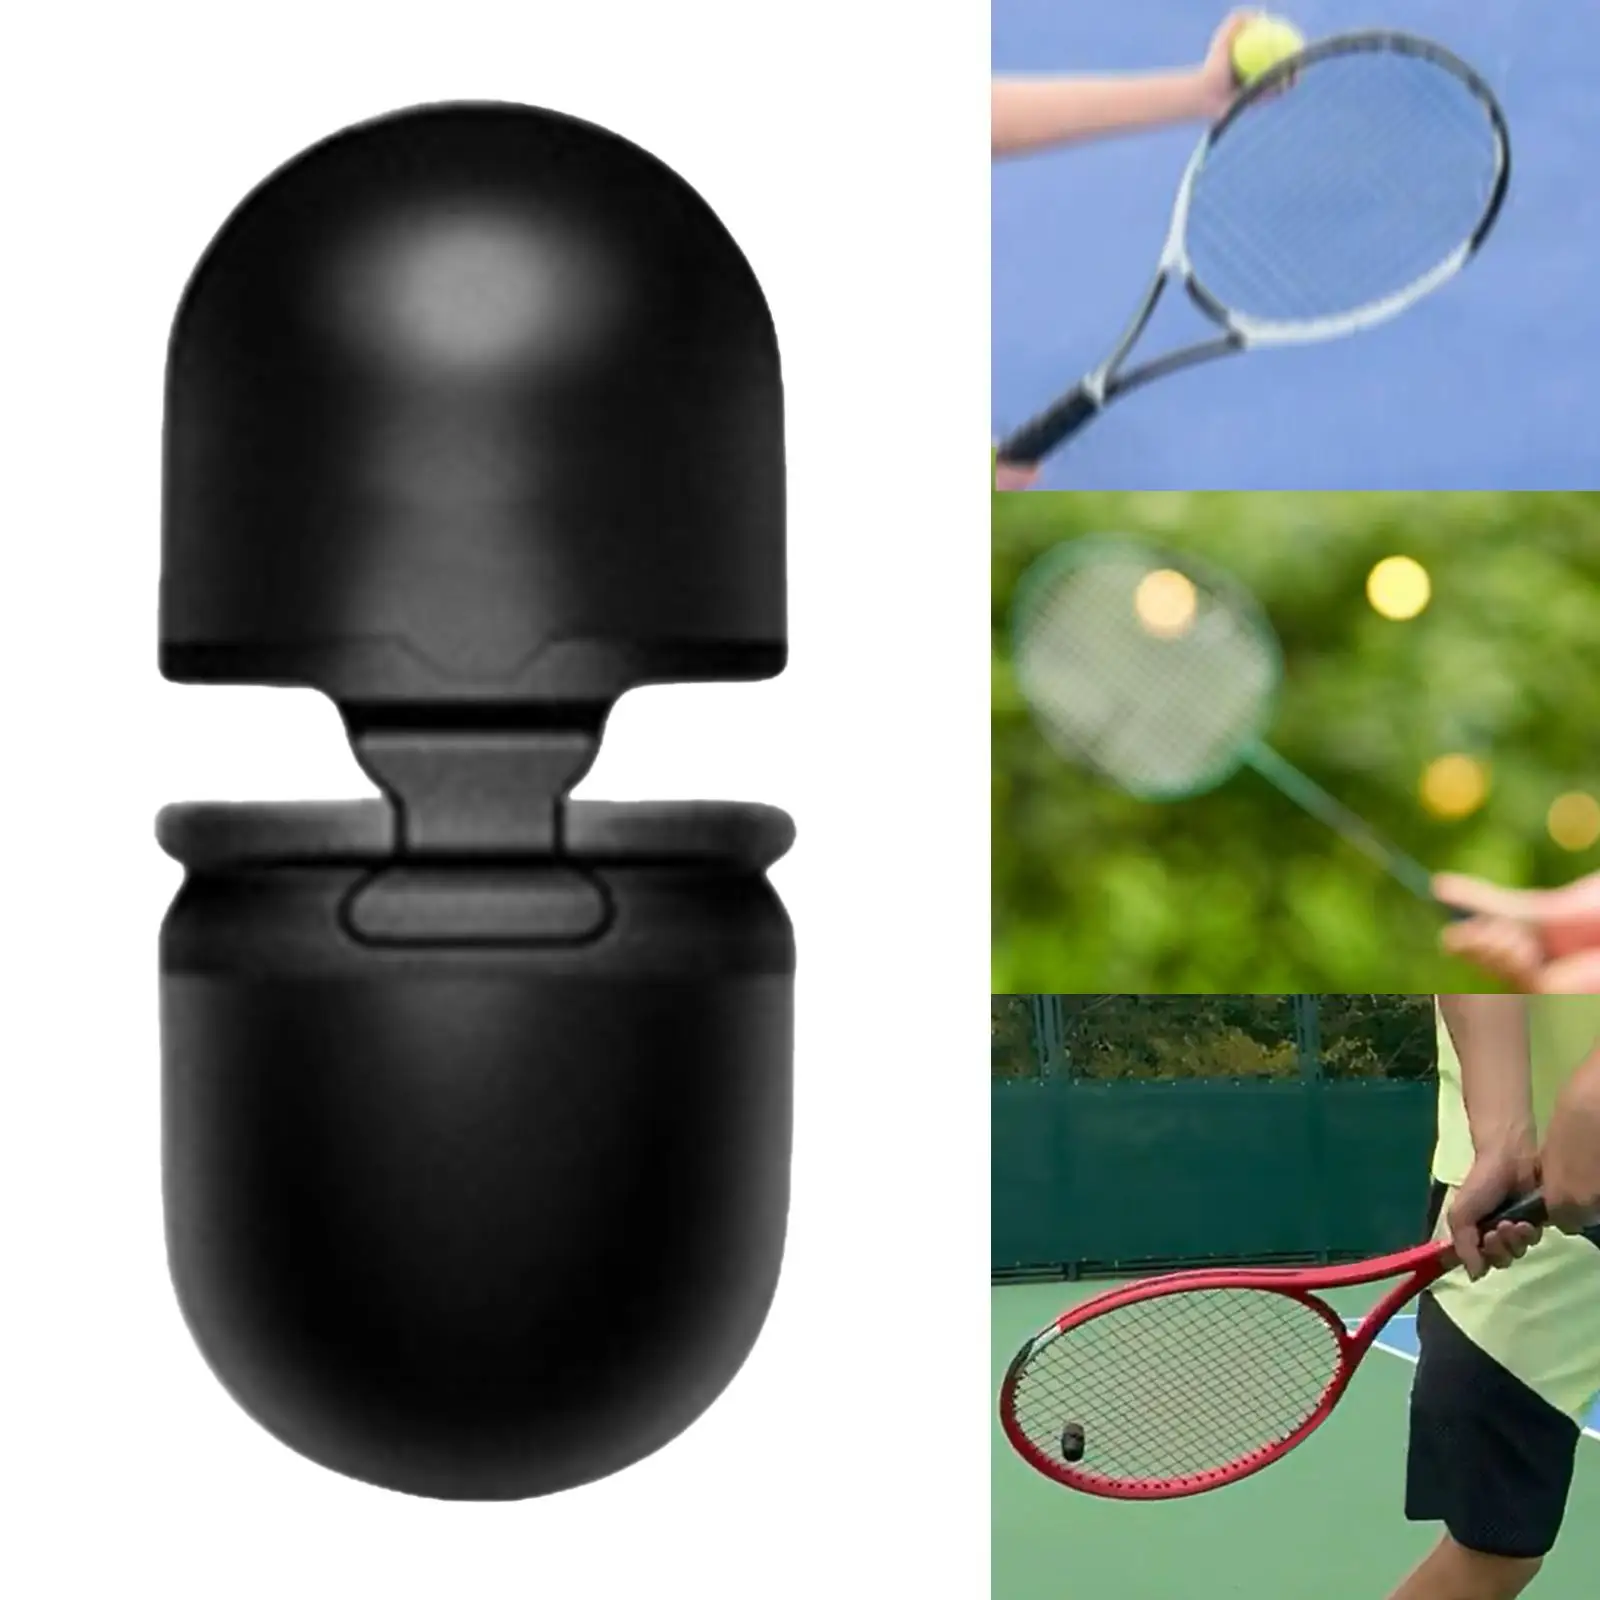 Tennis Topspin Whistle Topspin Strokes Practice Professional Portable Practice for Players Adults Kids Juniors Beginners Gifts